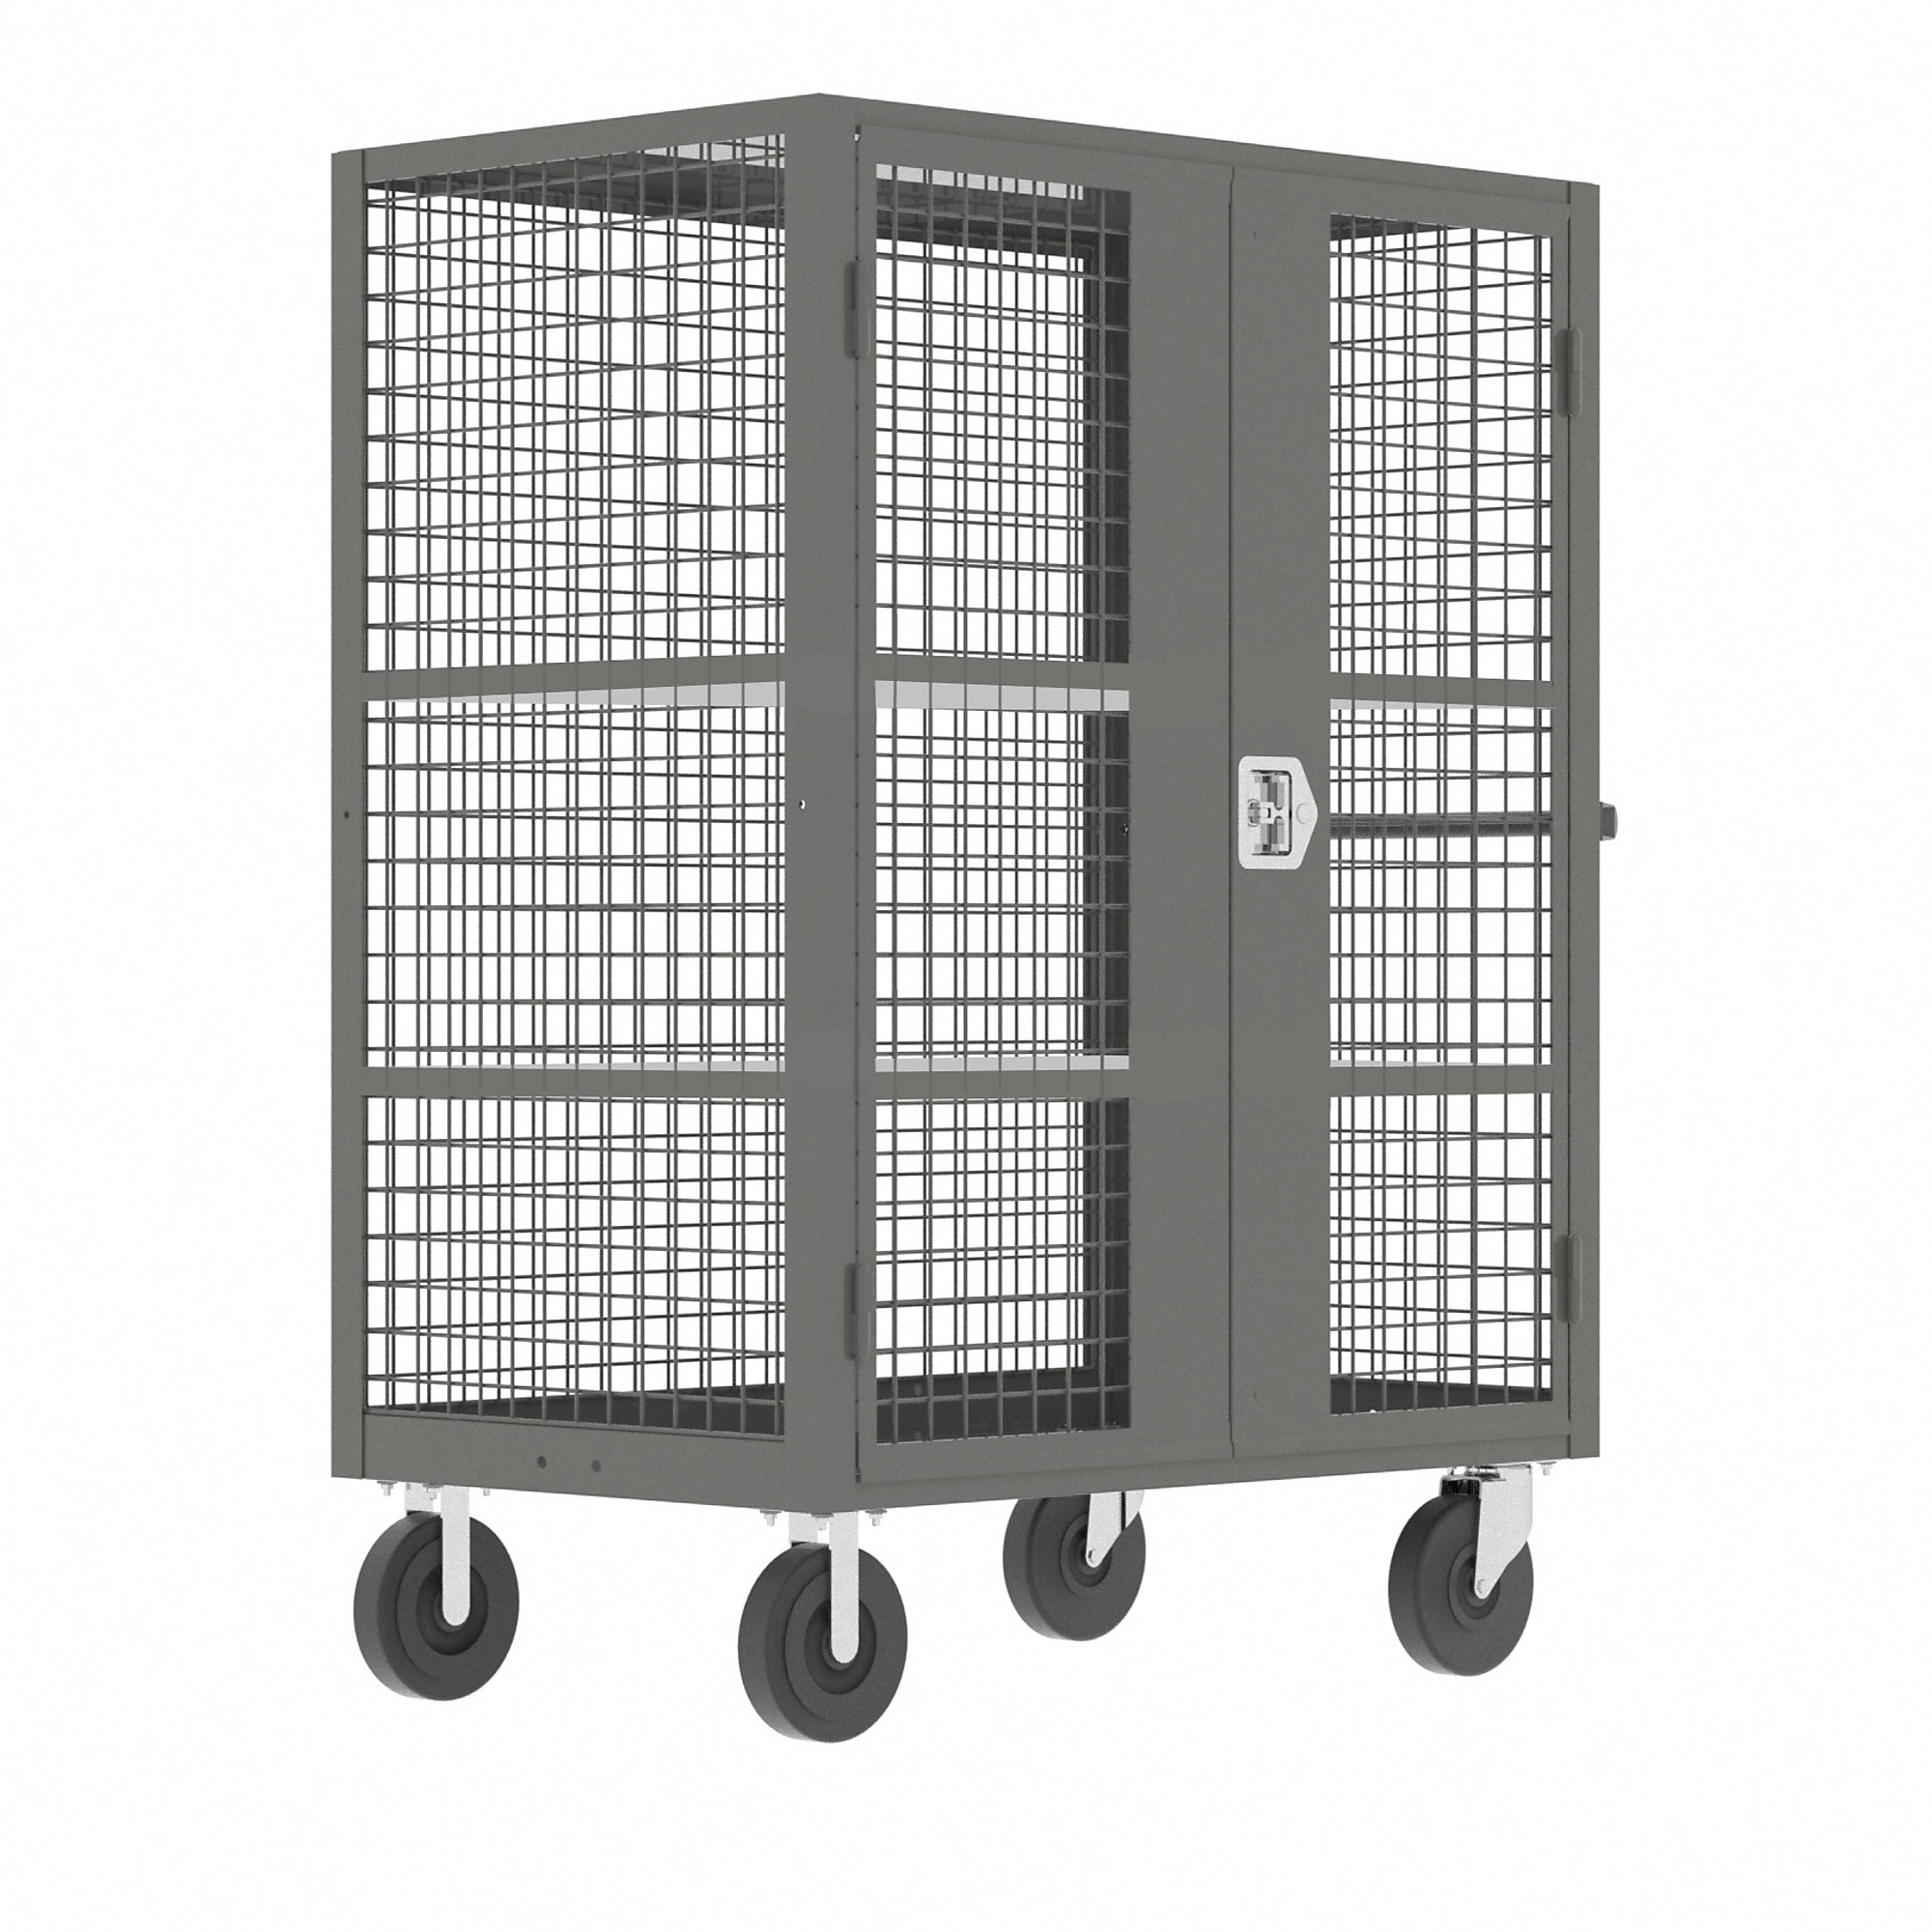 Valley Craft, Security Cart, 2 Shelves, Total Capacity 2000 lb, Shelves (qty.) 2, Material Steel, Model F89060VCGY